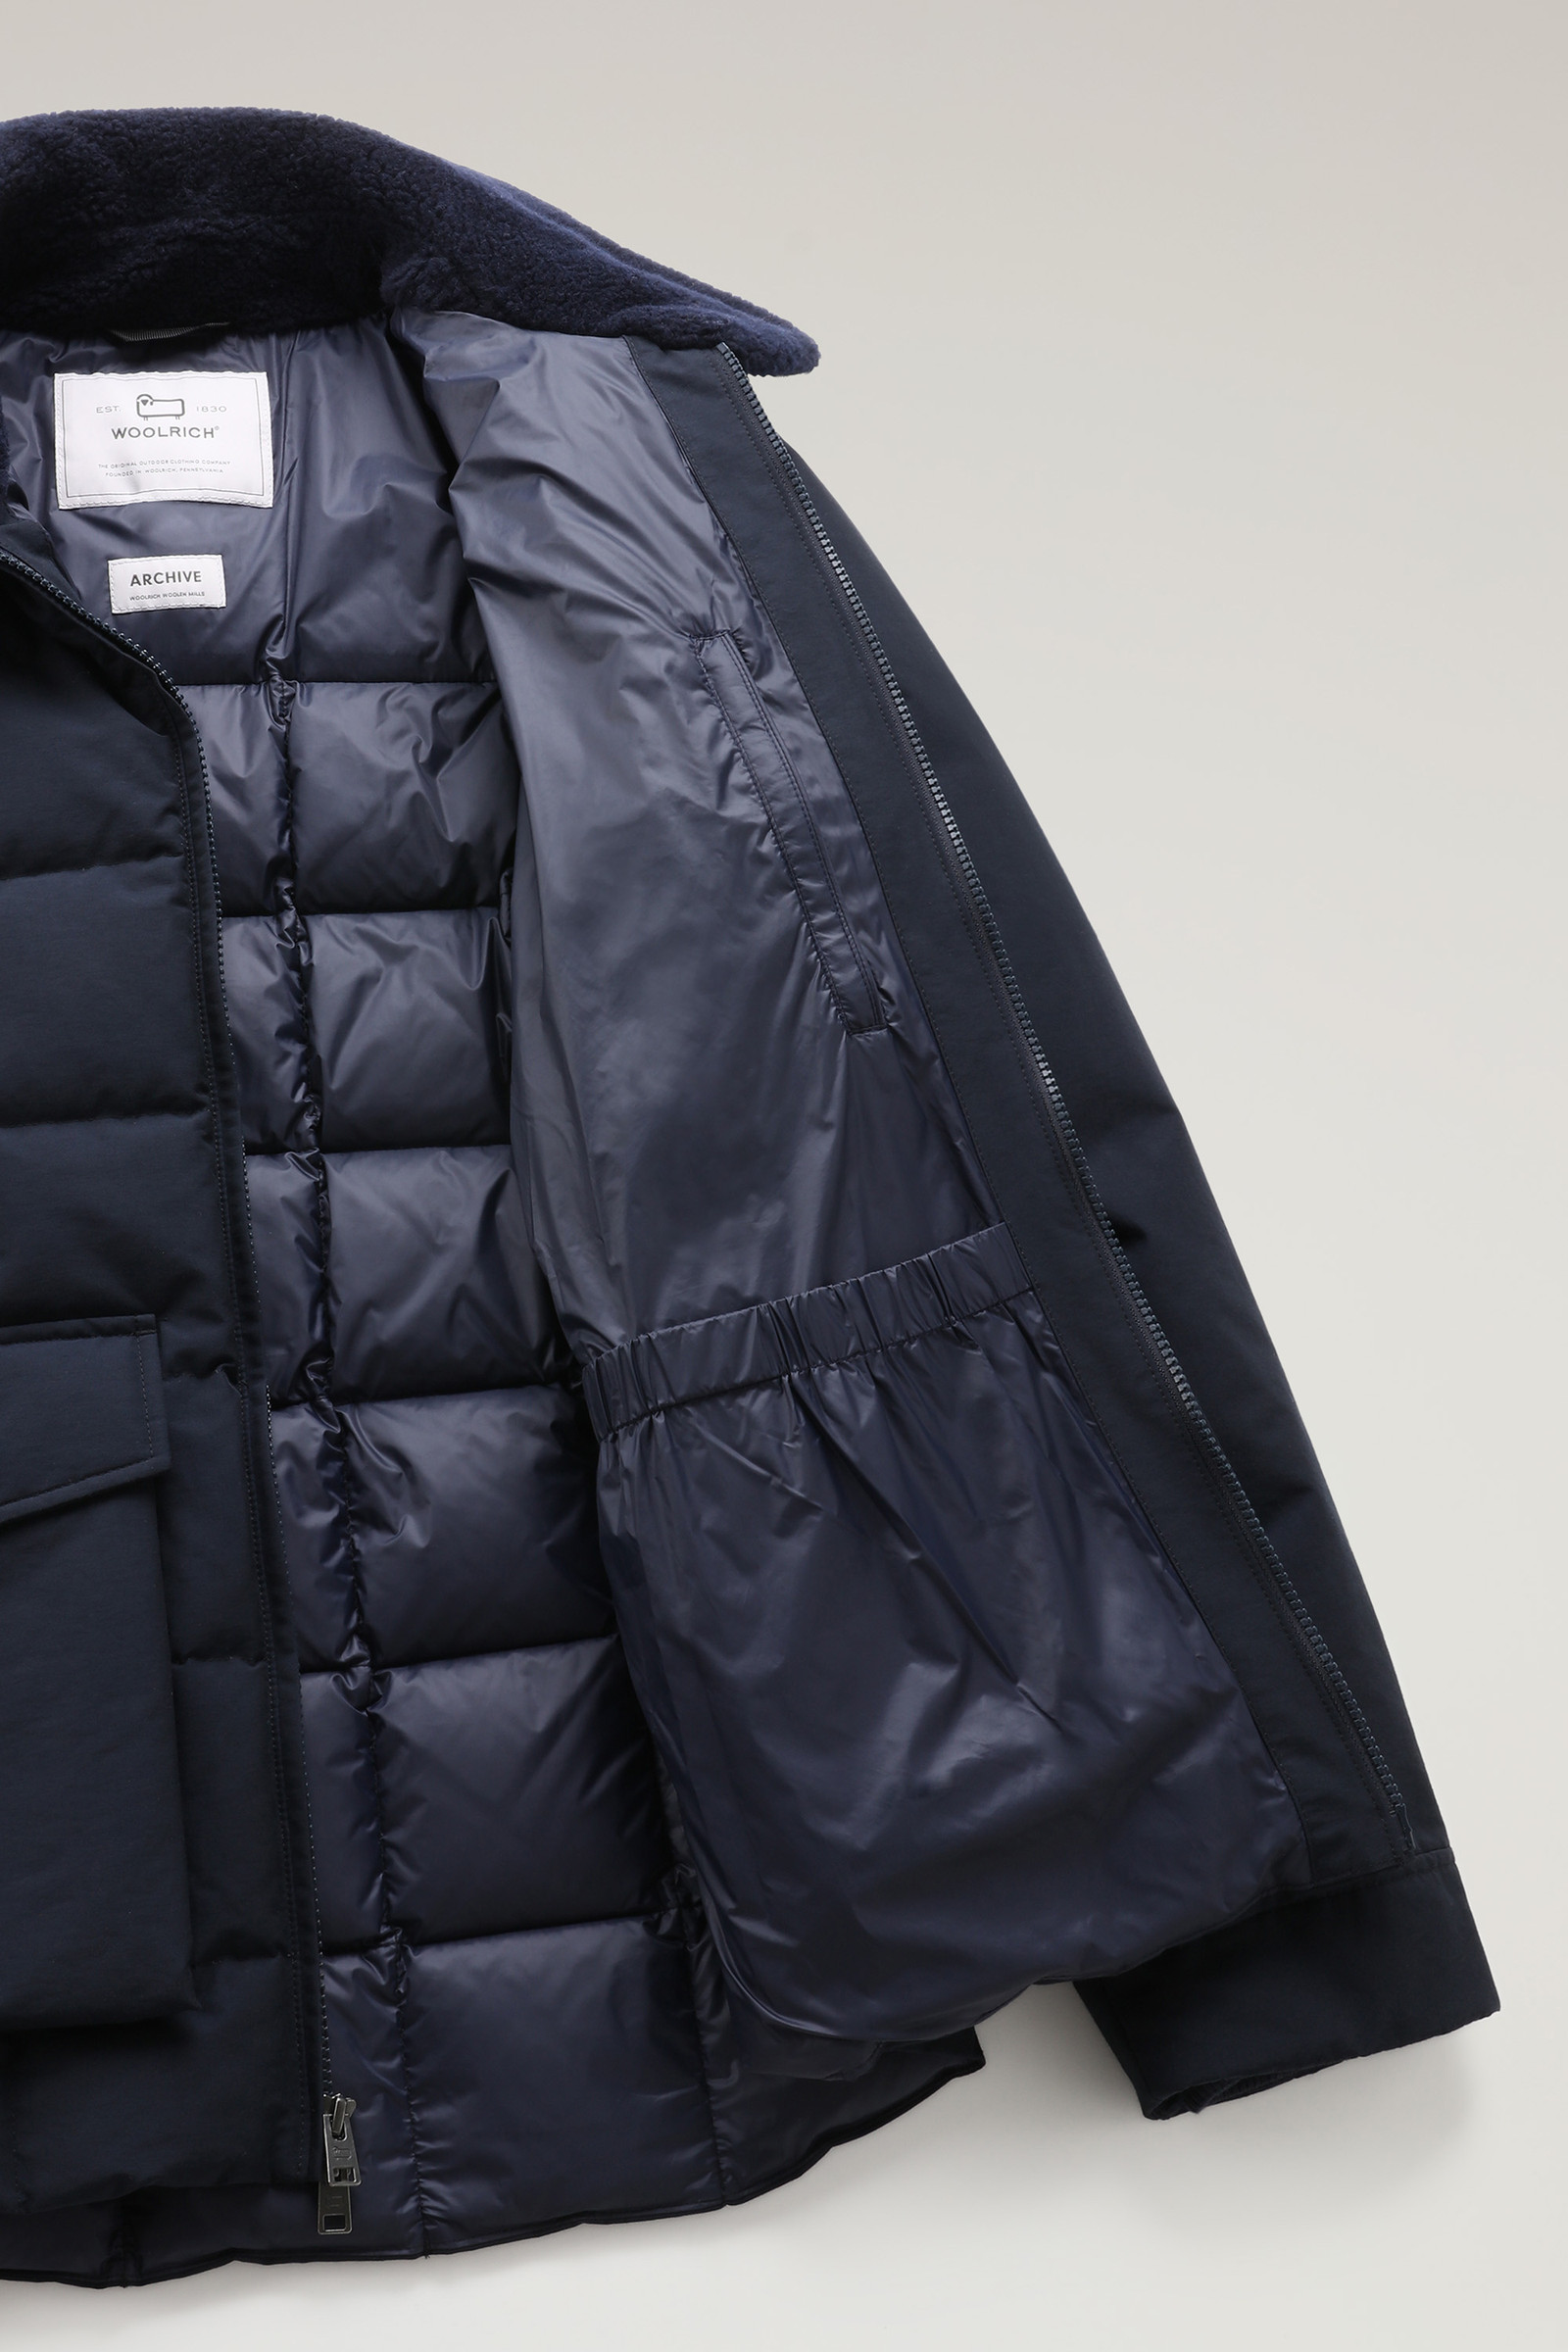 Men's Blizzard Duster Quilted Jacket in Eco Ramar Blue | Woolrich USA